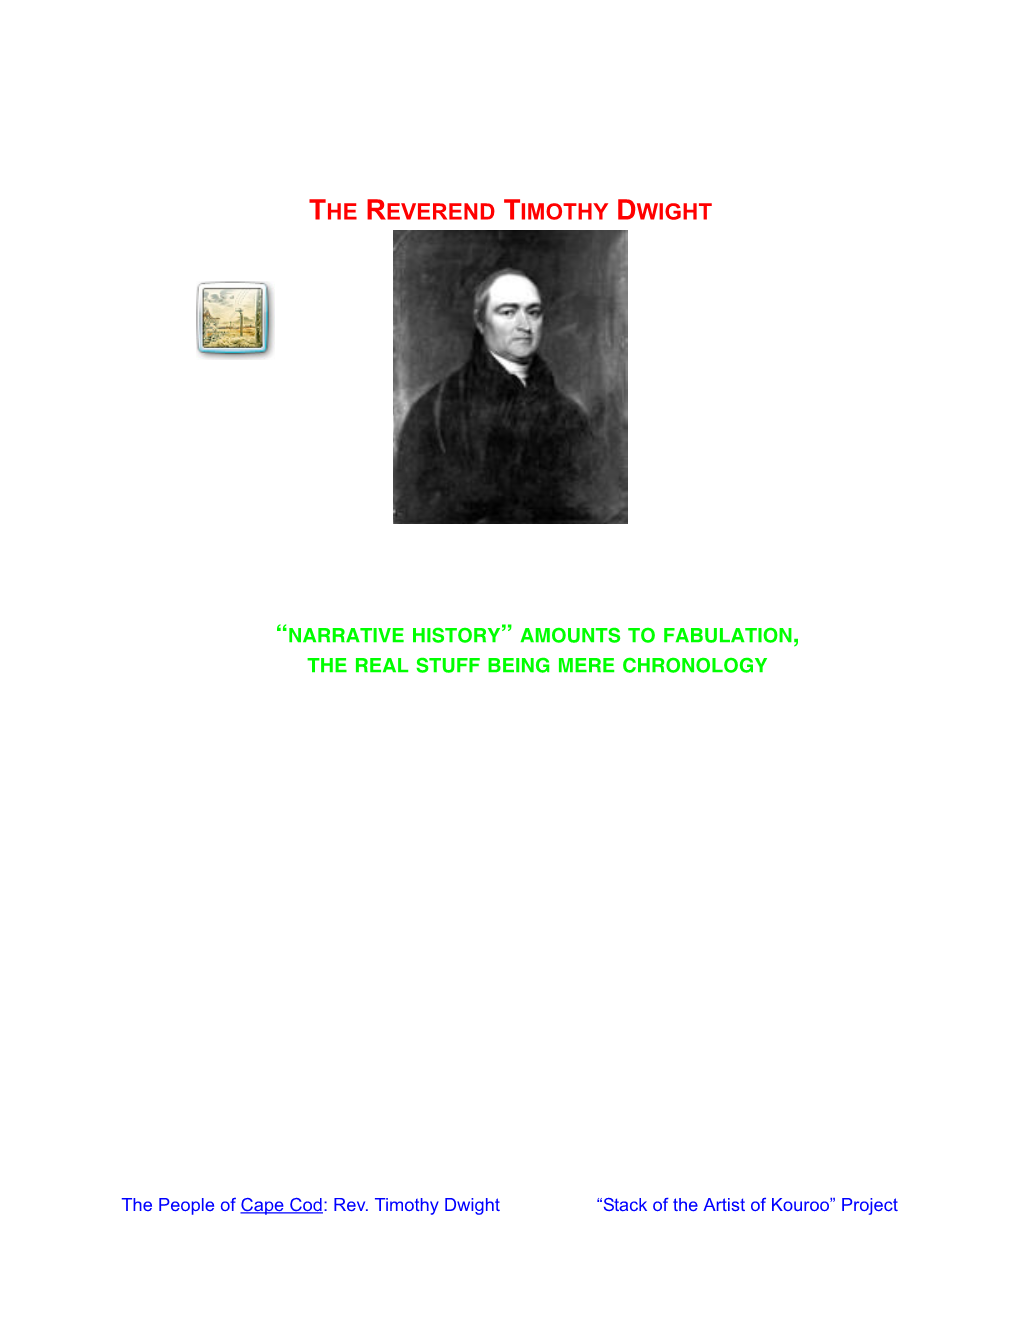 Reverend Timothy Dwight